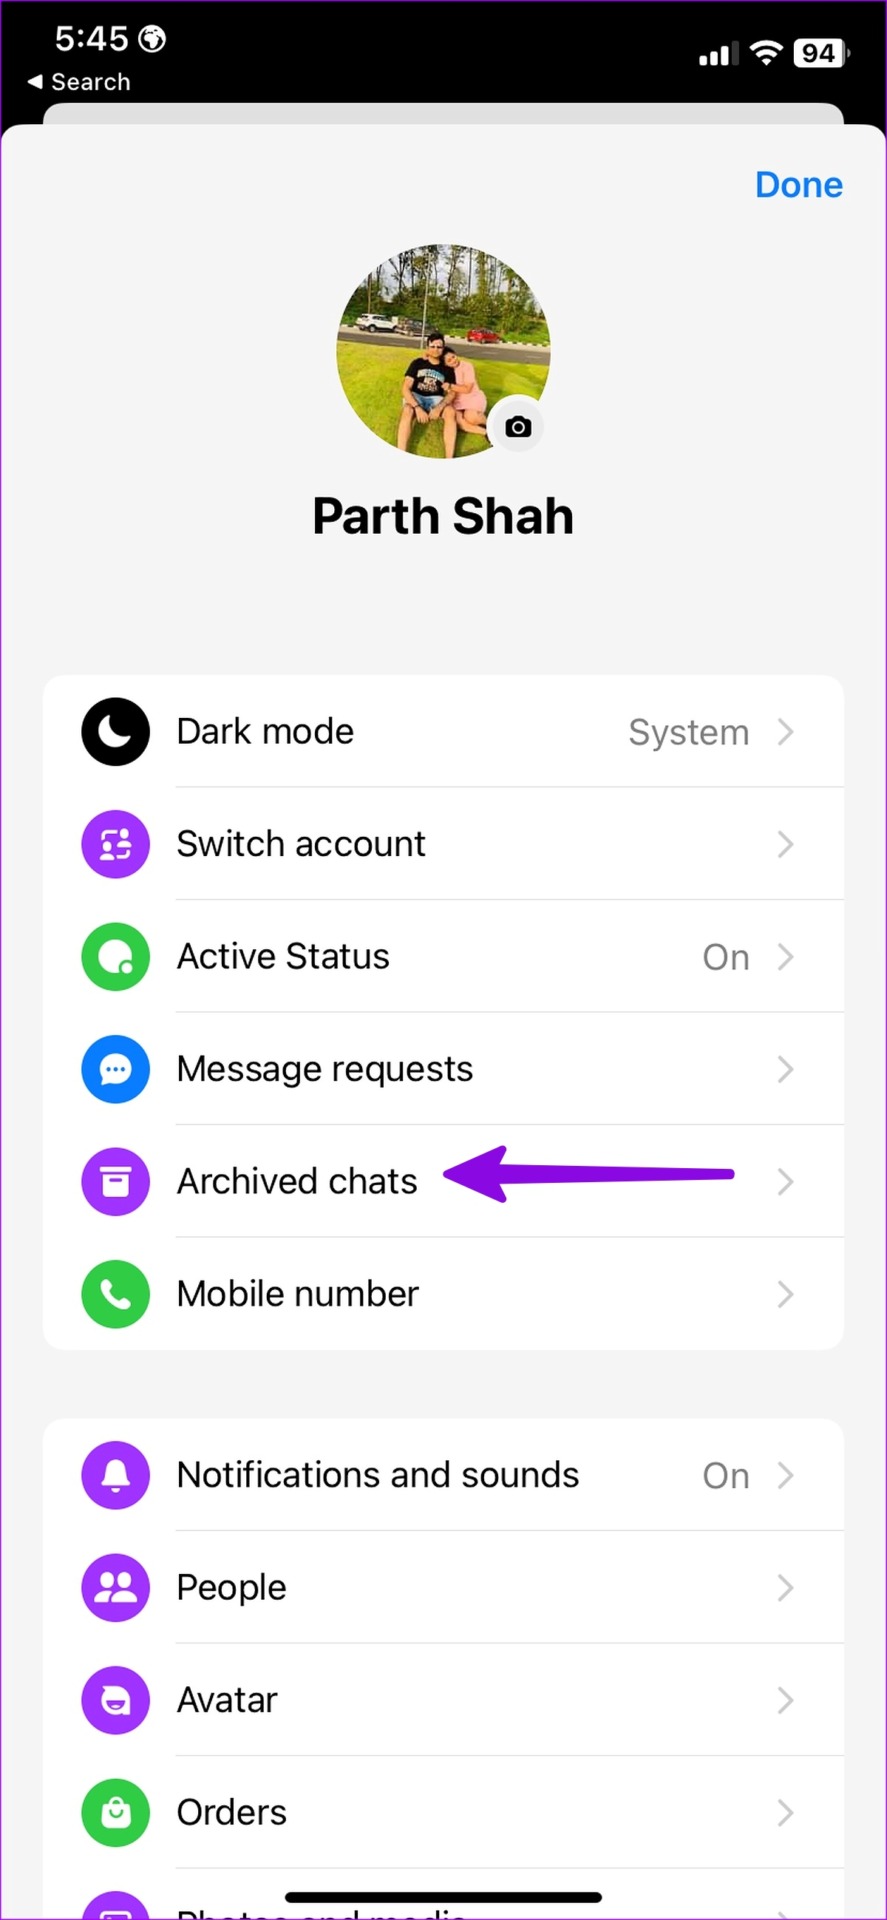 archived chats on Facebook Messenger for iPhone